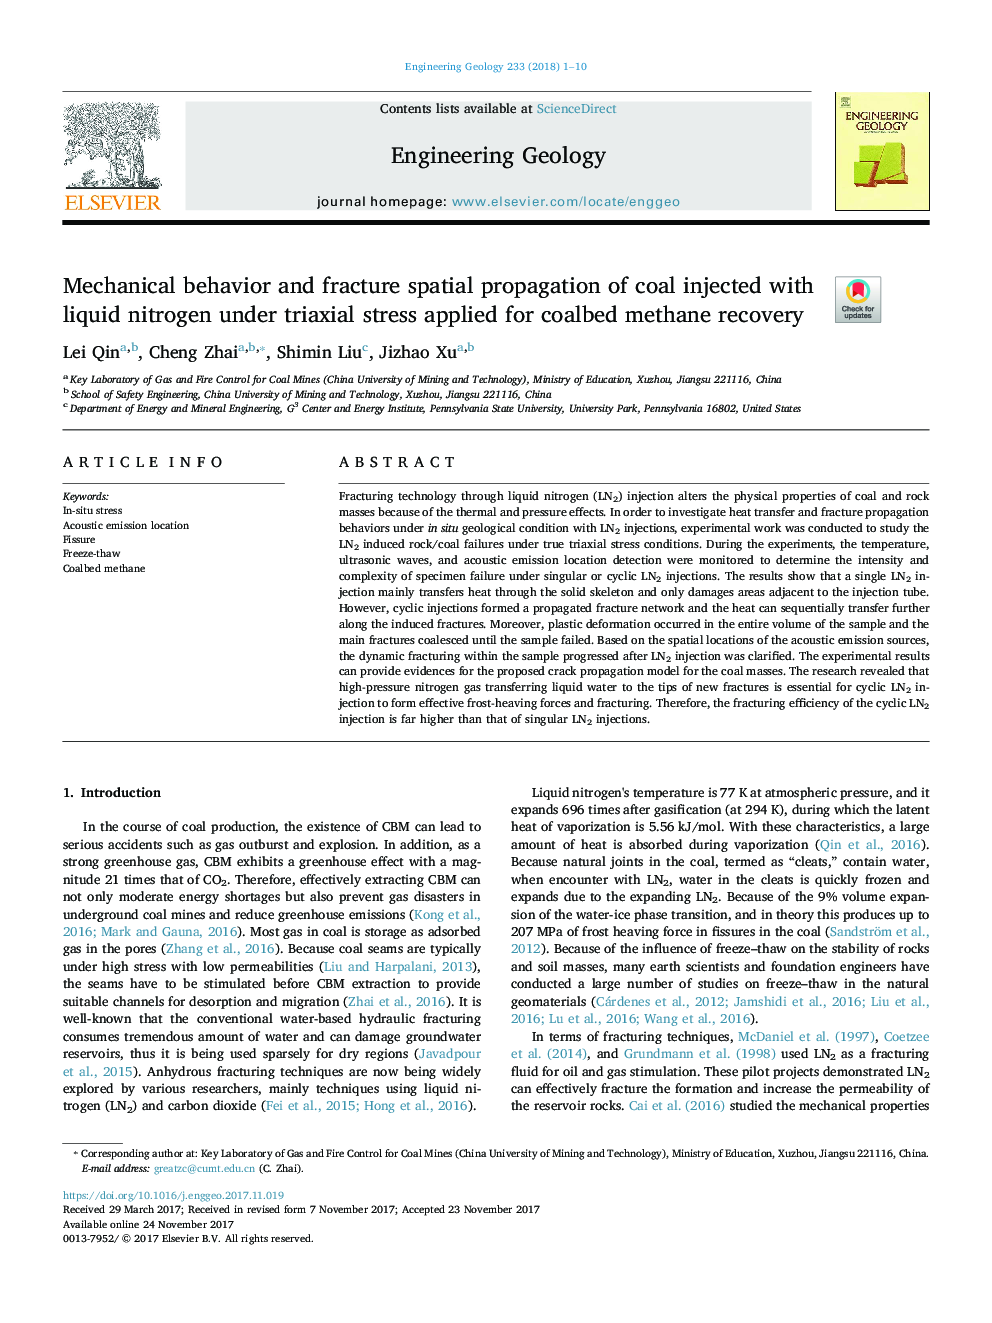 Mechanical behavior and fracture spatial propagation of coal injected with liquid nitrogen under triaxial stress applied for coalbed methane recovery